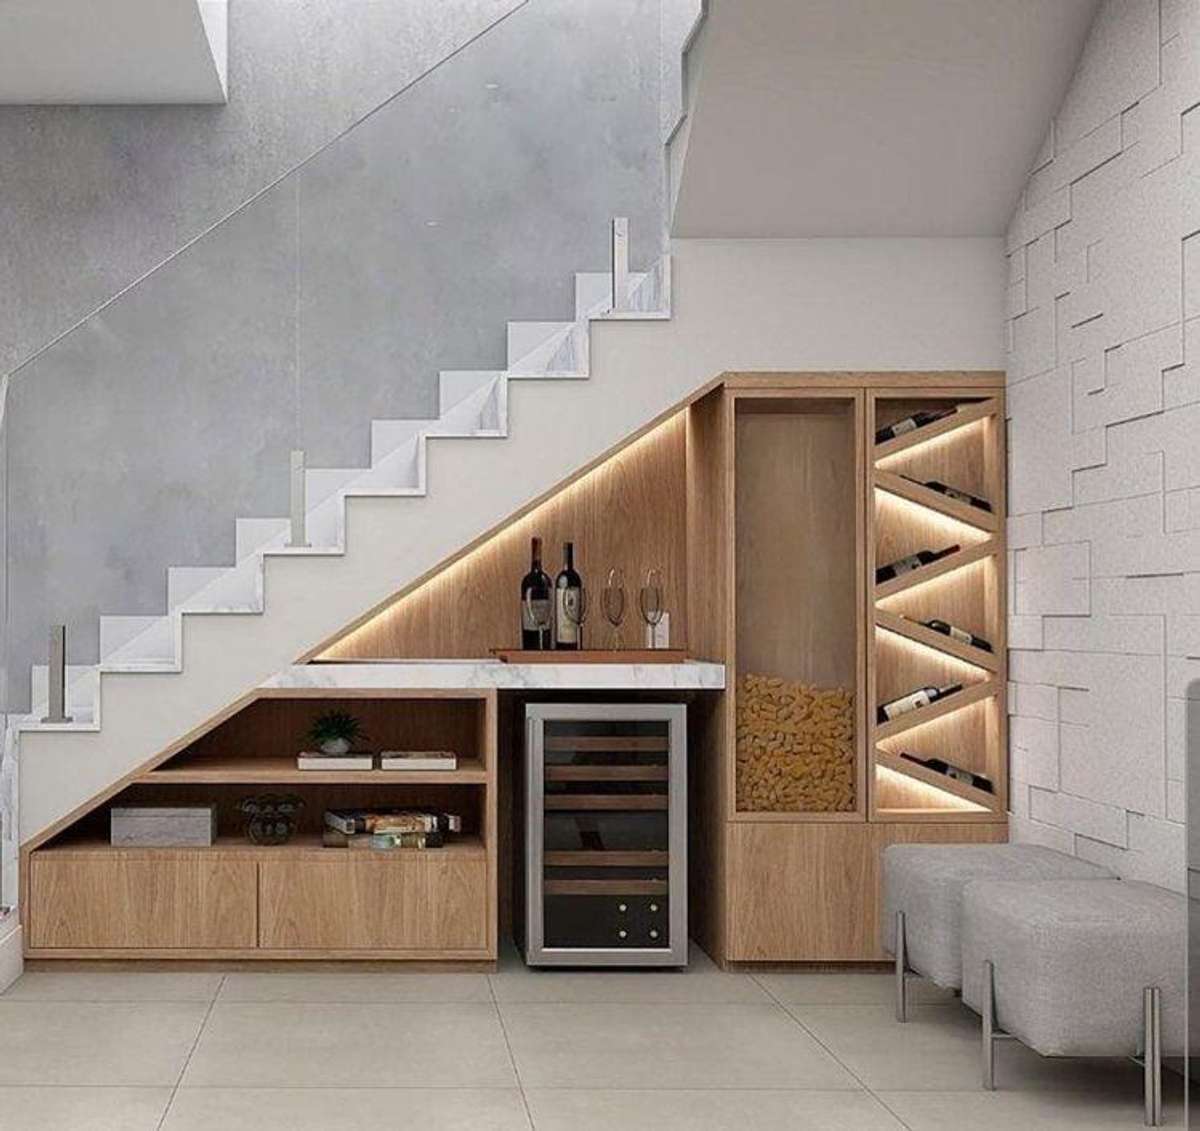 Ideas to utilise space under staircase. For architectural plans    and Interior design contact us @A&P Projects
#Architect #InteriorDesigner #StaircaseDecors #creative #HouseConstruction #callon8287002506